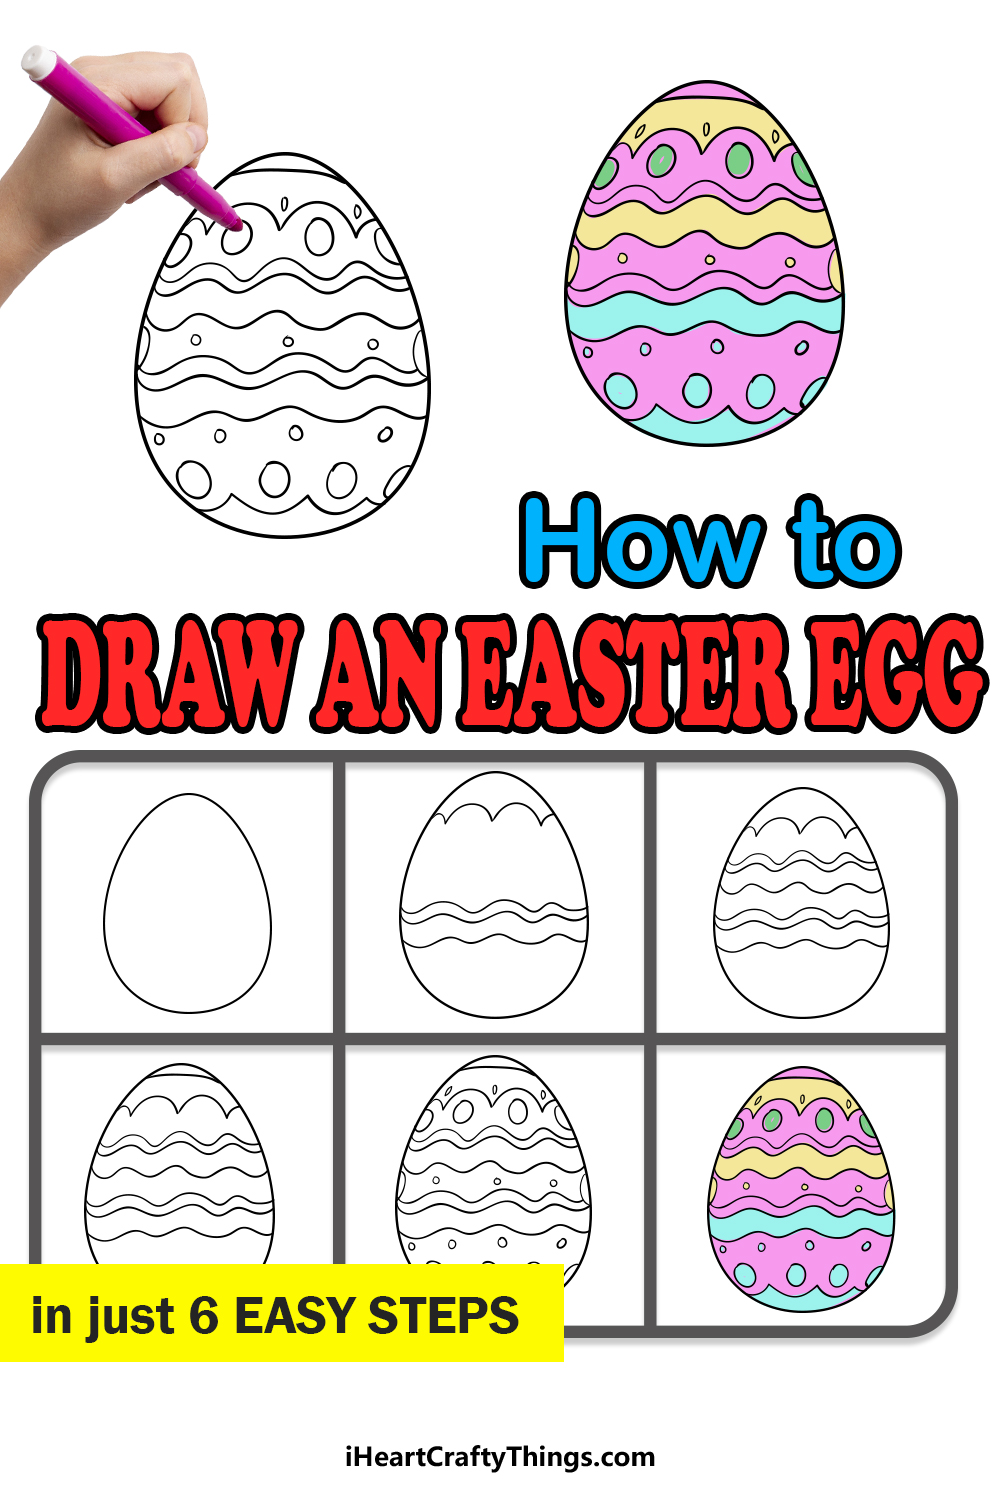 How to draw an Easter egg in 6 easy steps